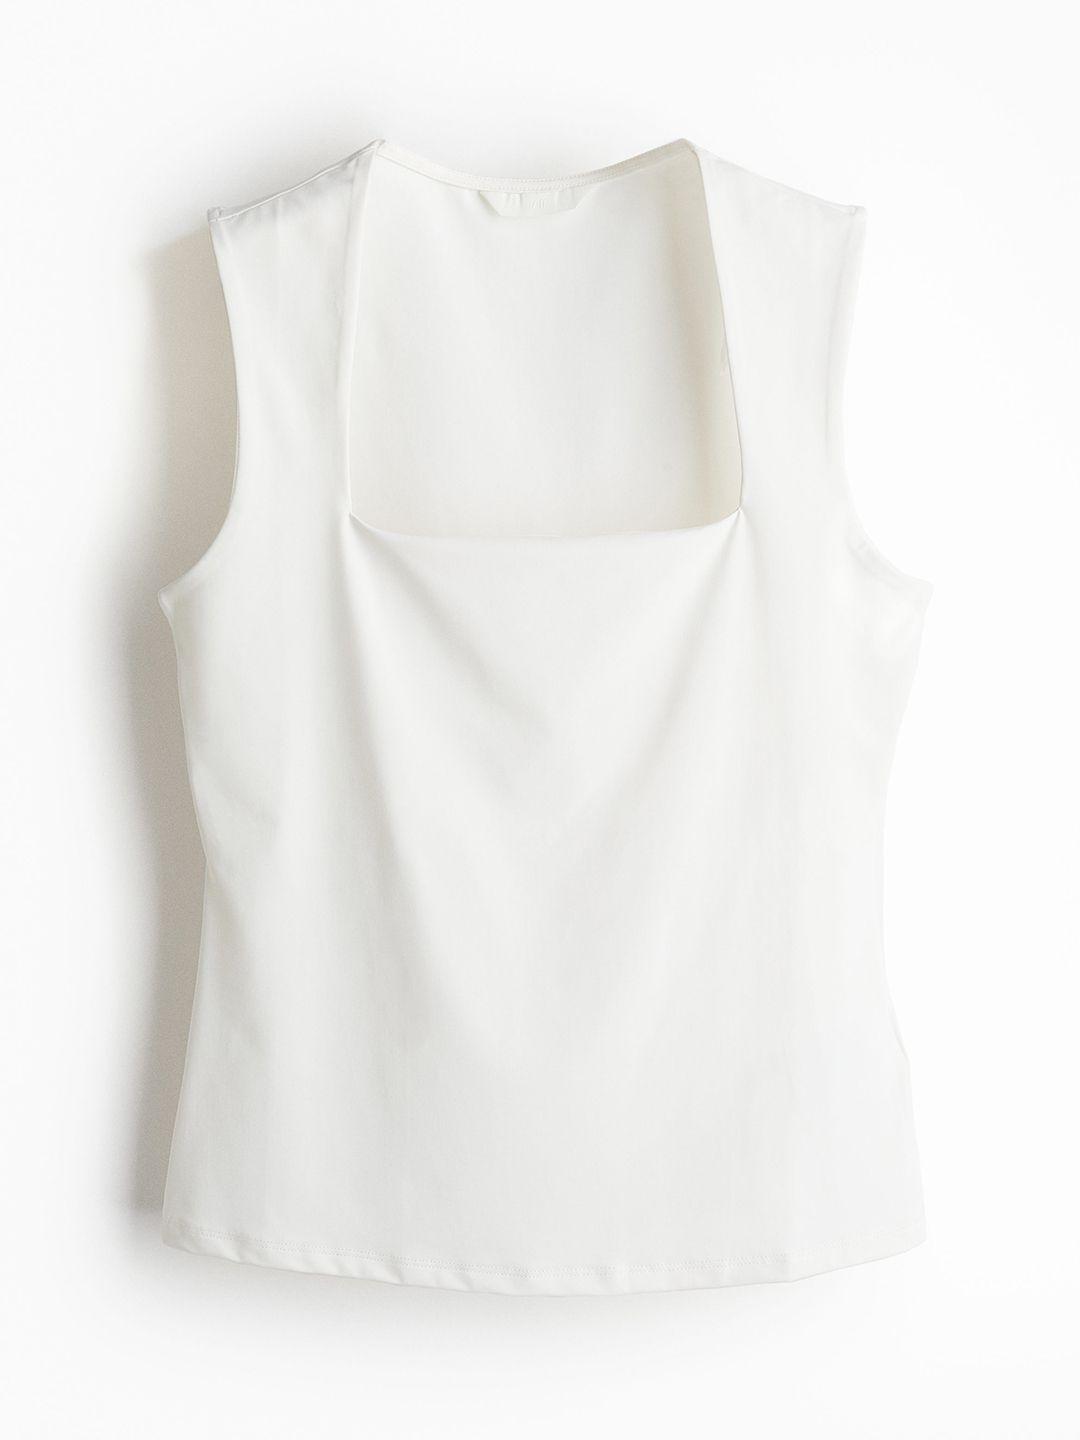 H&M Women Square-Neck Jersey Top